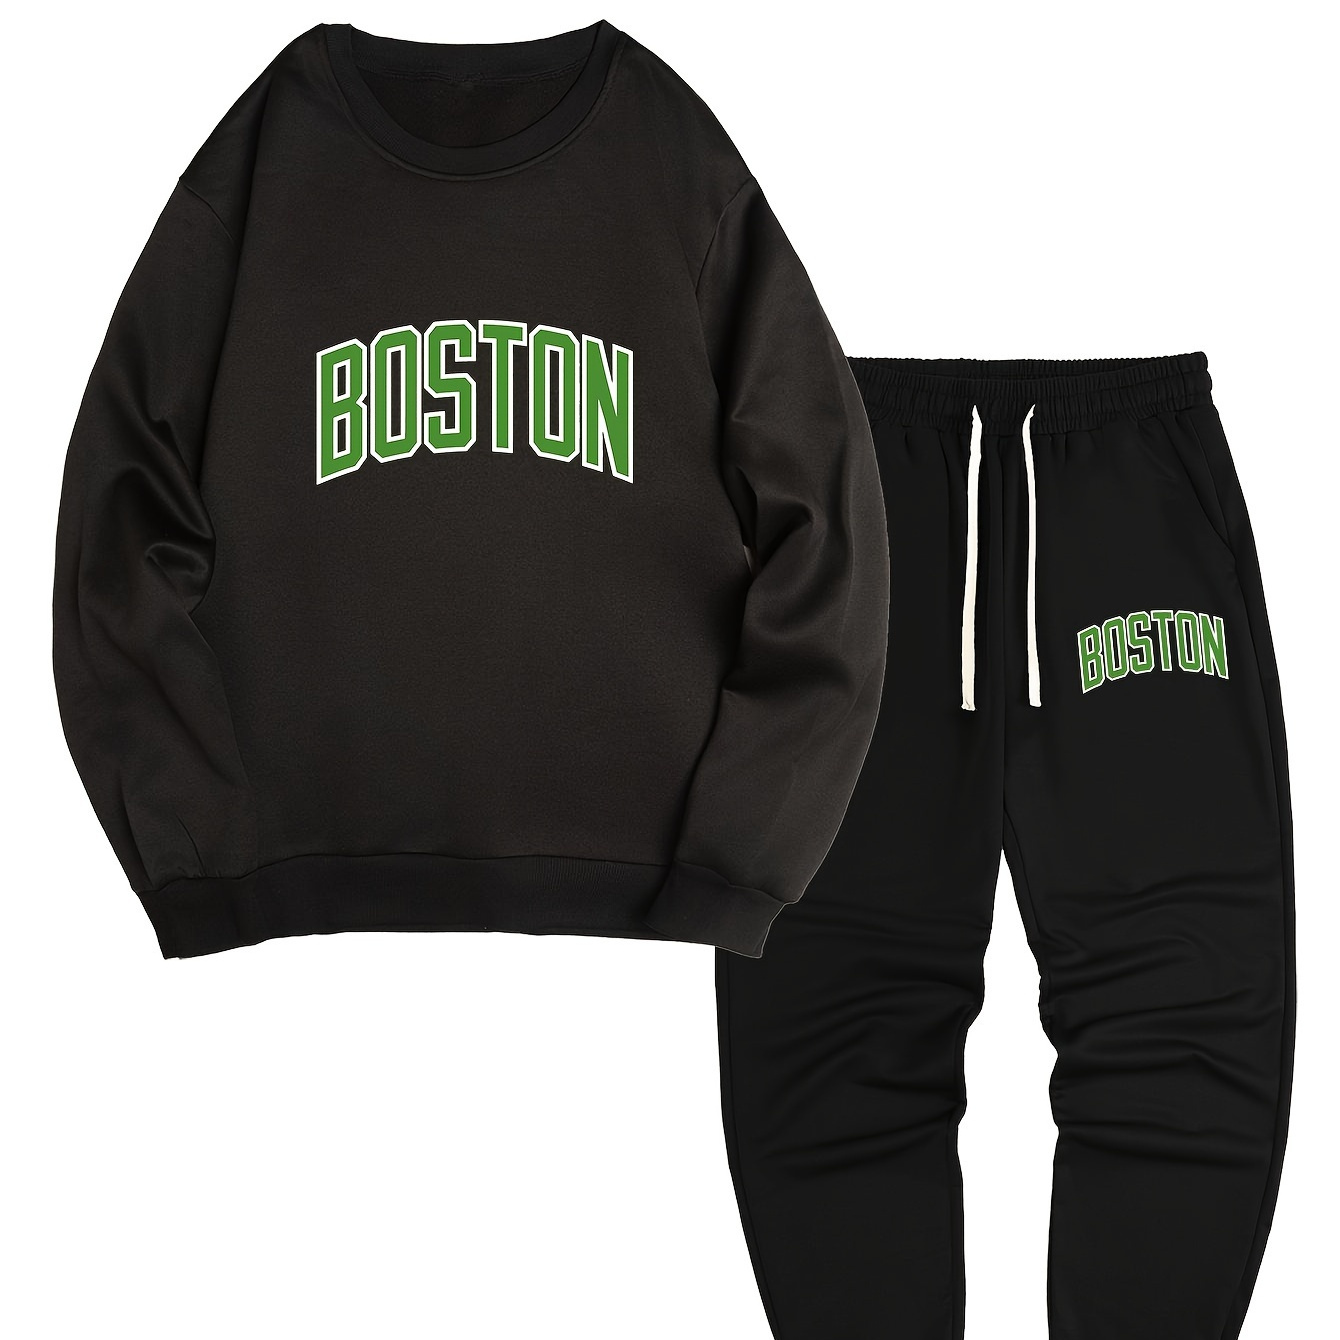 

Boston Pattern Print Men's Long Sleeve Round Neck Street Casual Sports And Fashionable Sweatshirt, Elastic Drawstring Trousers, Sweatshirt And Pants Two-piece Set, For Outdoor, For Autumn And Winter